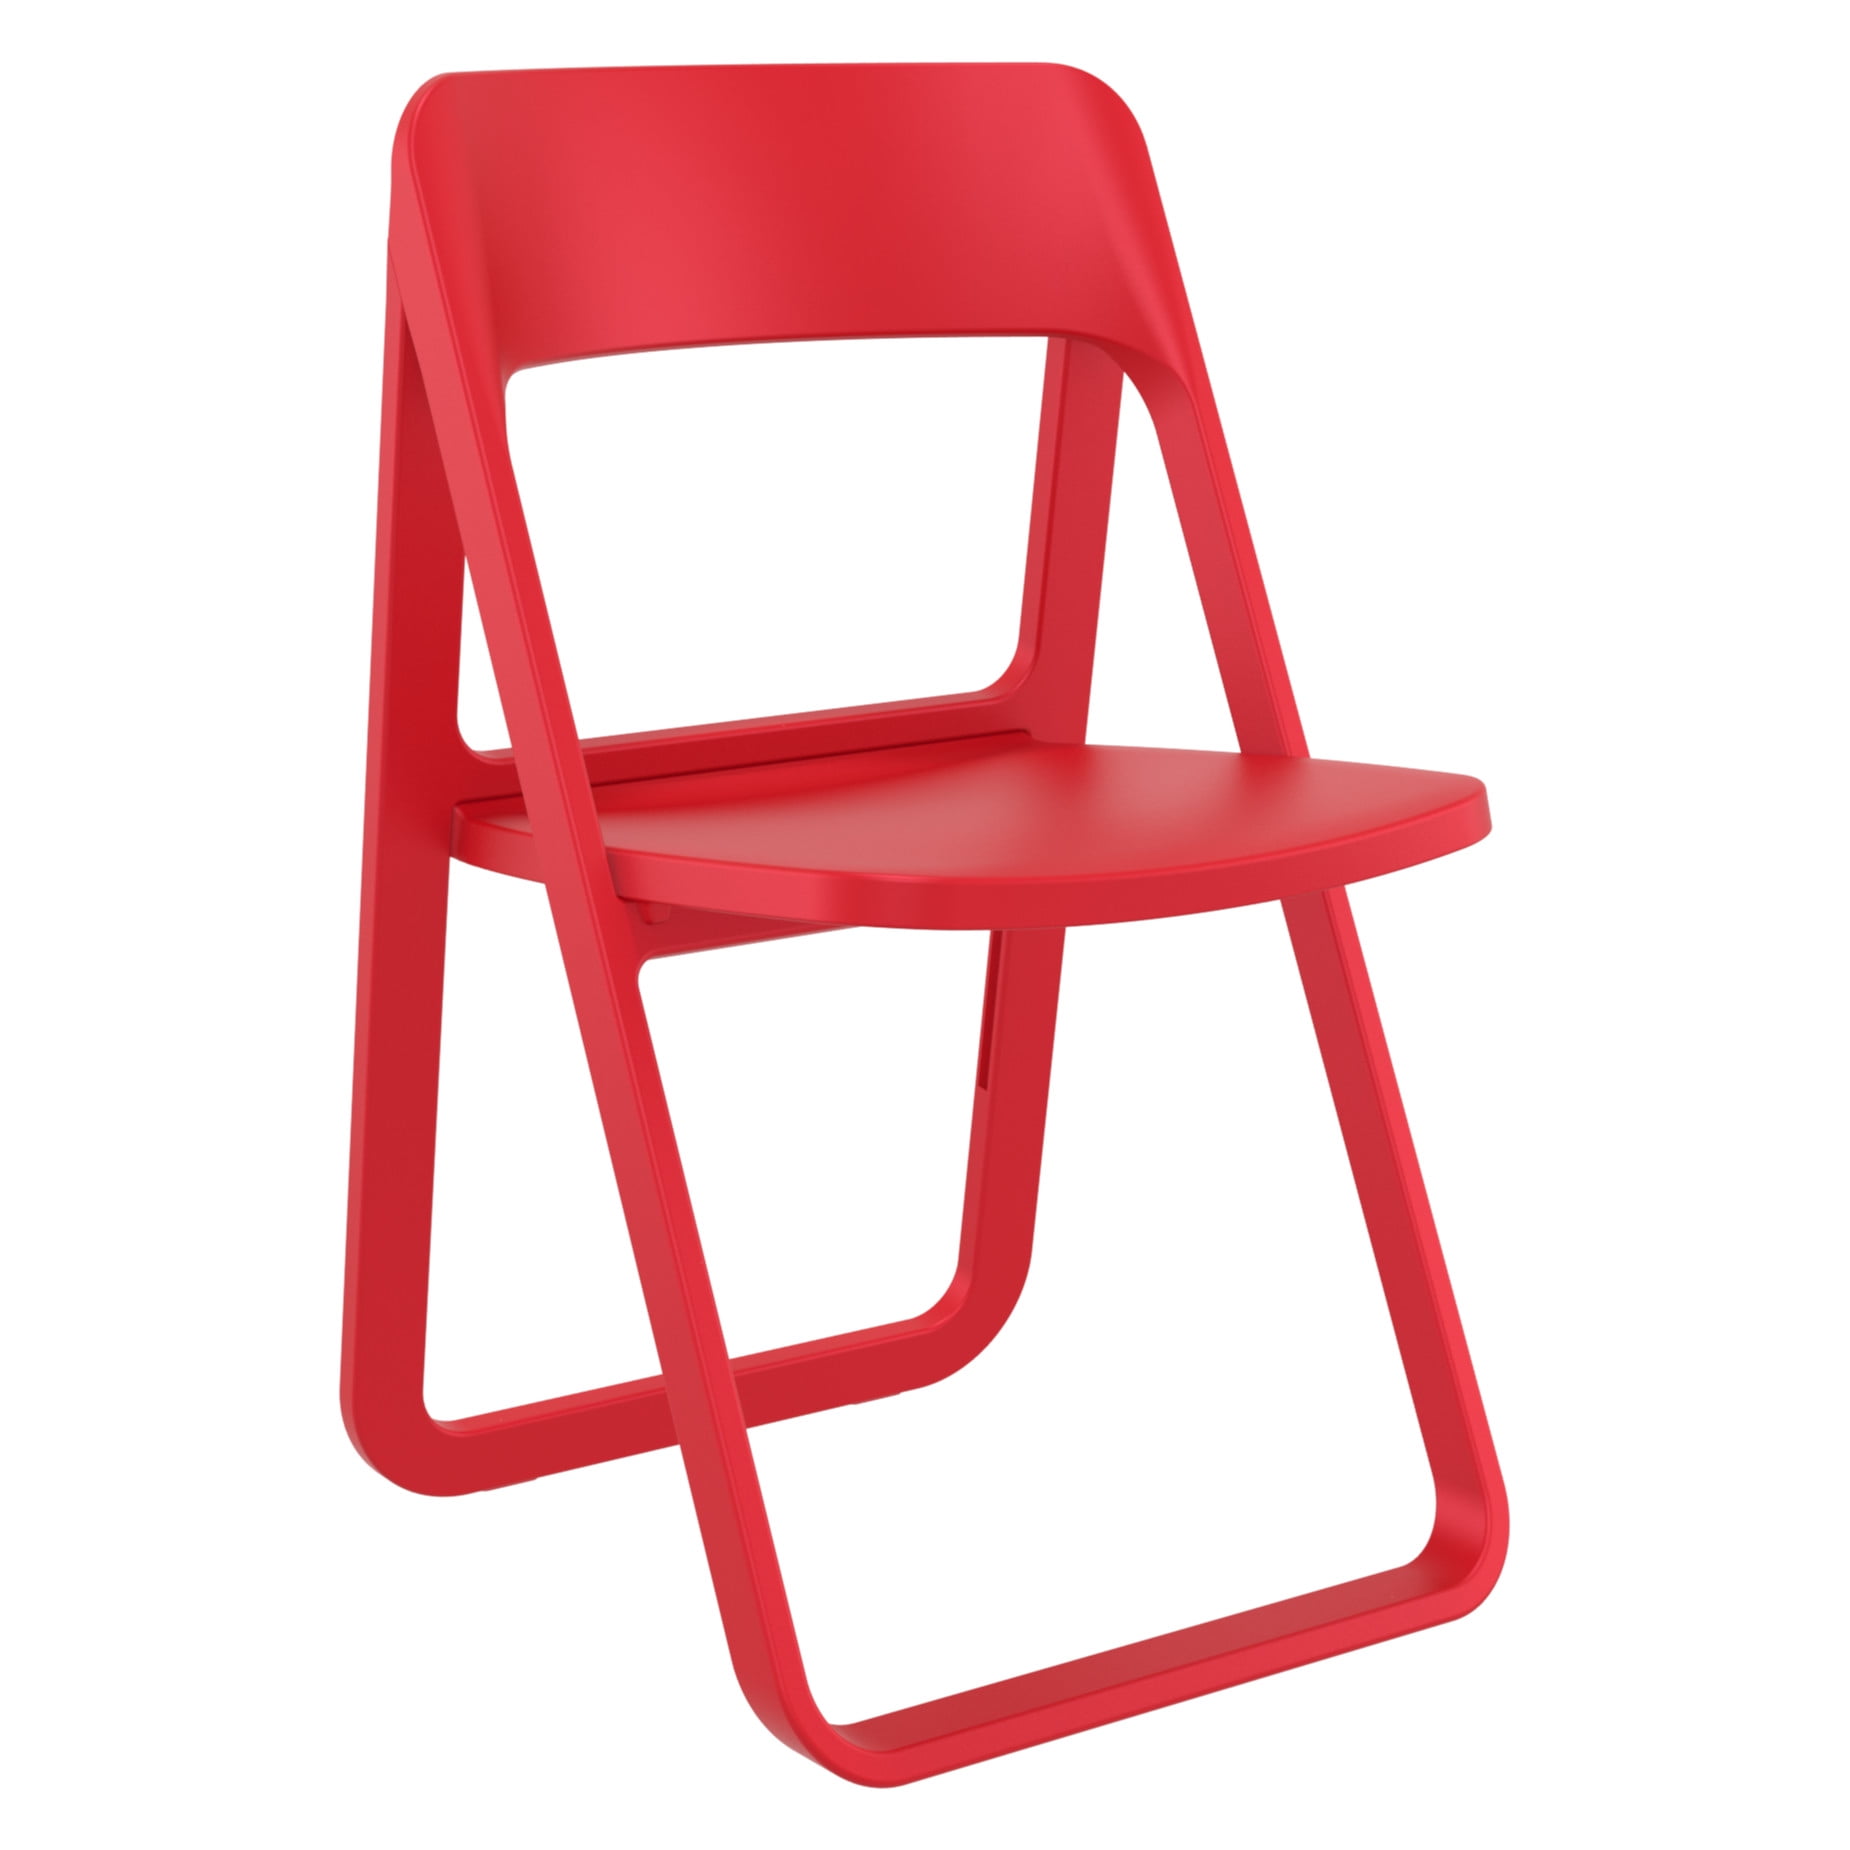 Isp079-red Dream Folding Outdoor Chair, Red